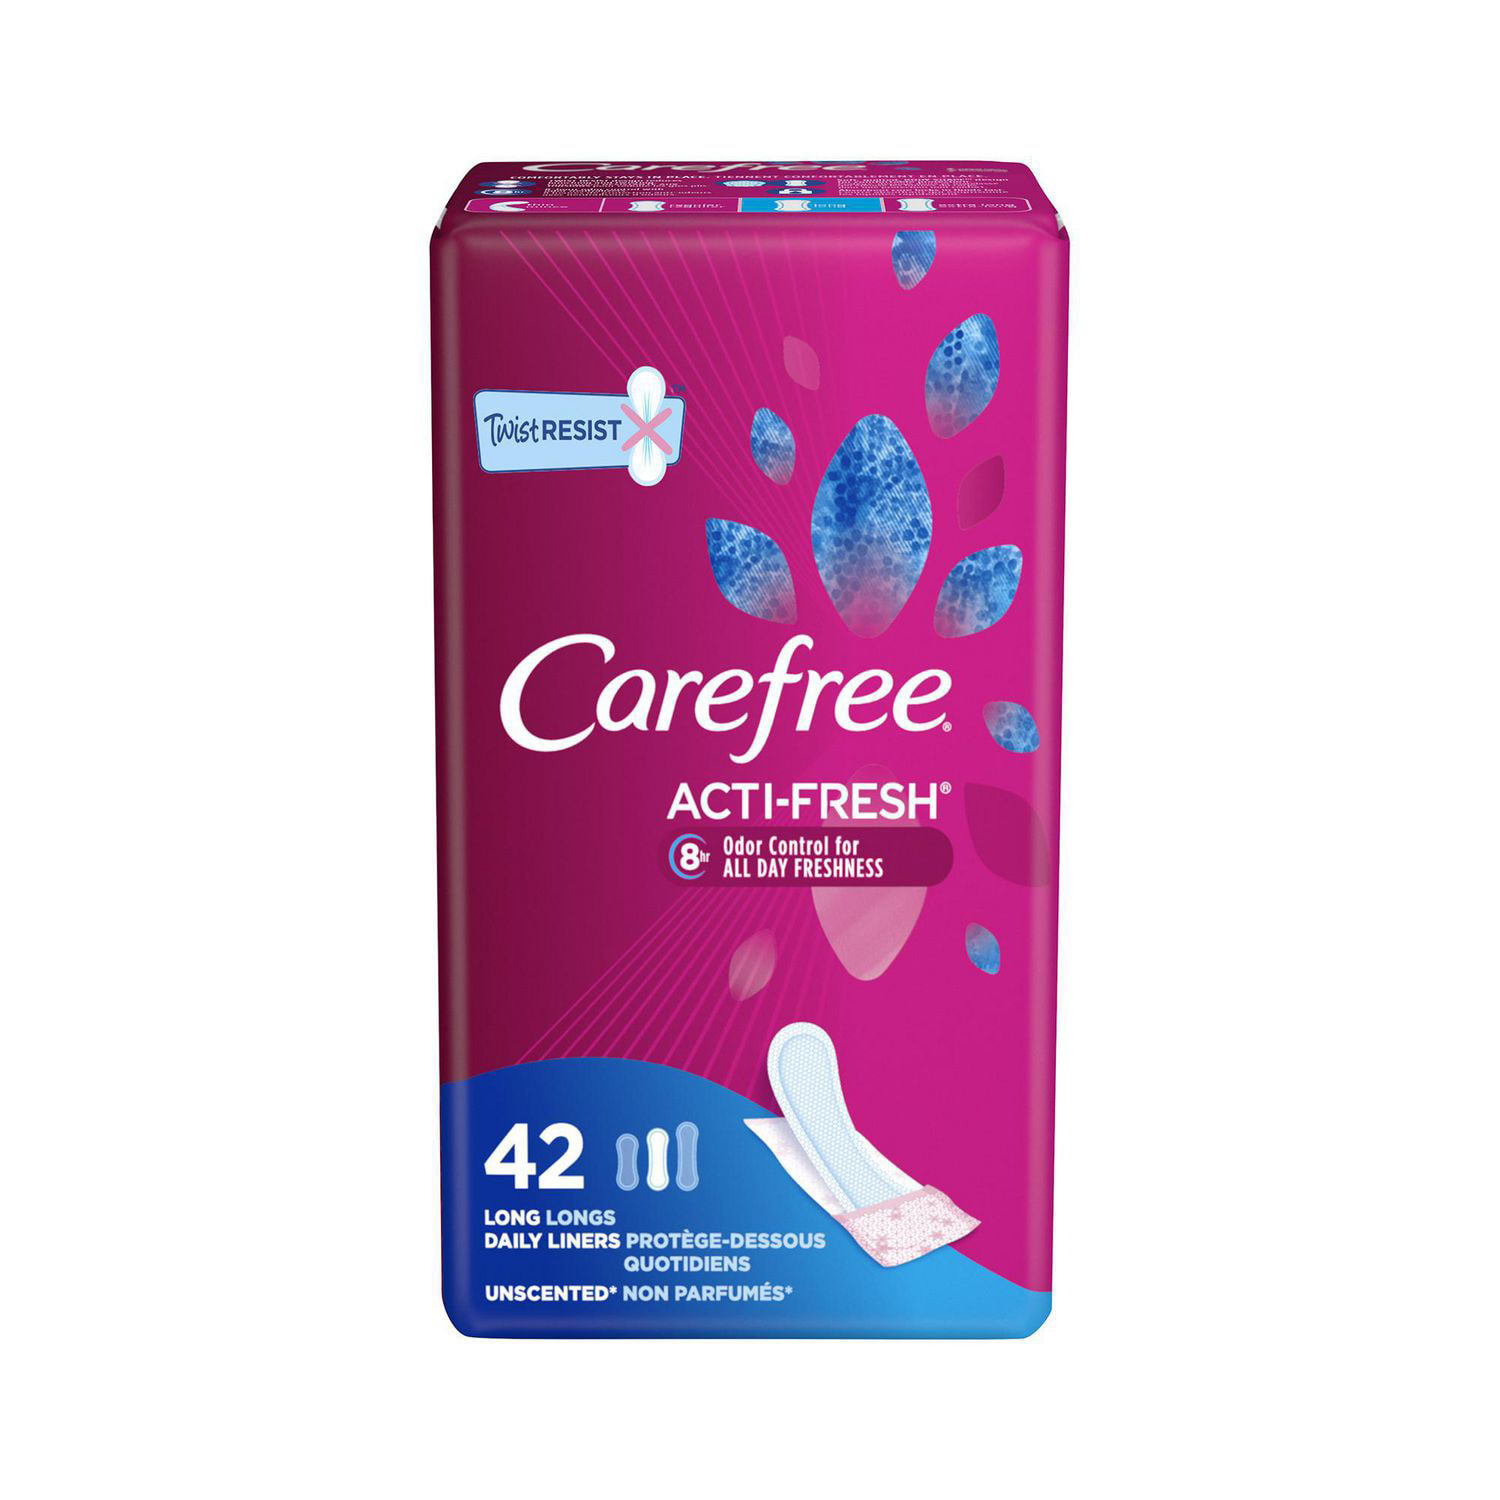 Carefree Acti-Fresh Body Shape Panty Liners Long To Go Pack of 42 Liners,  42 Panty Liners 